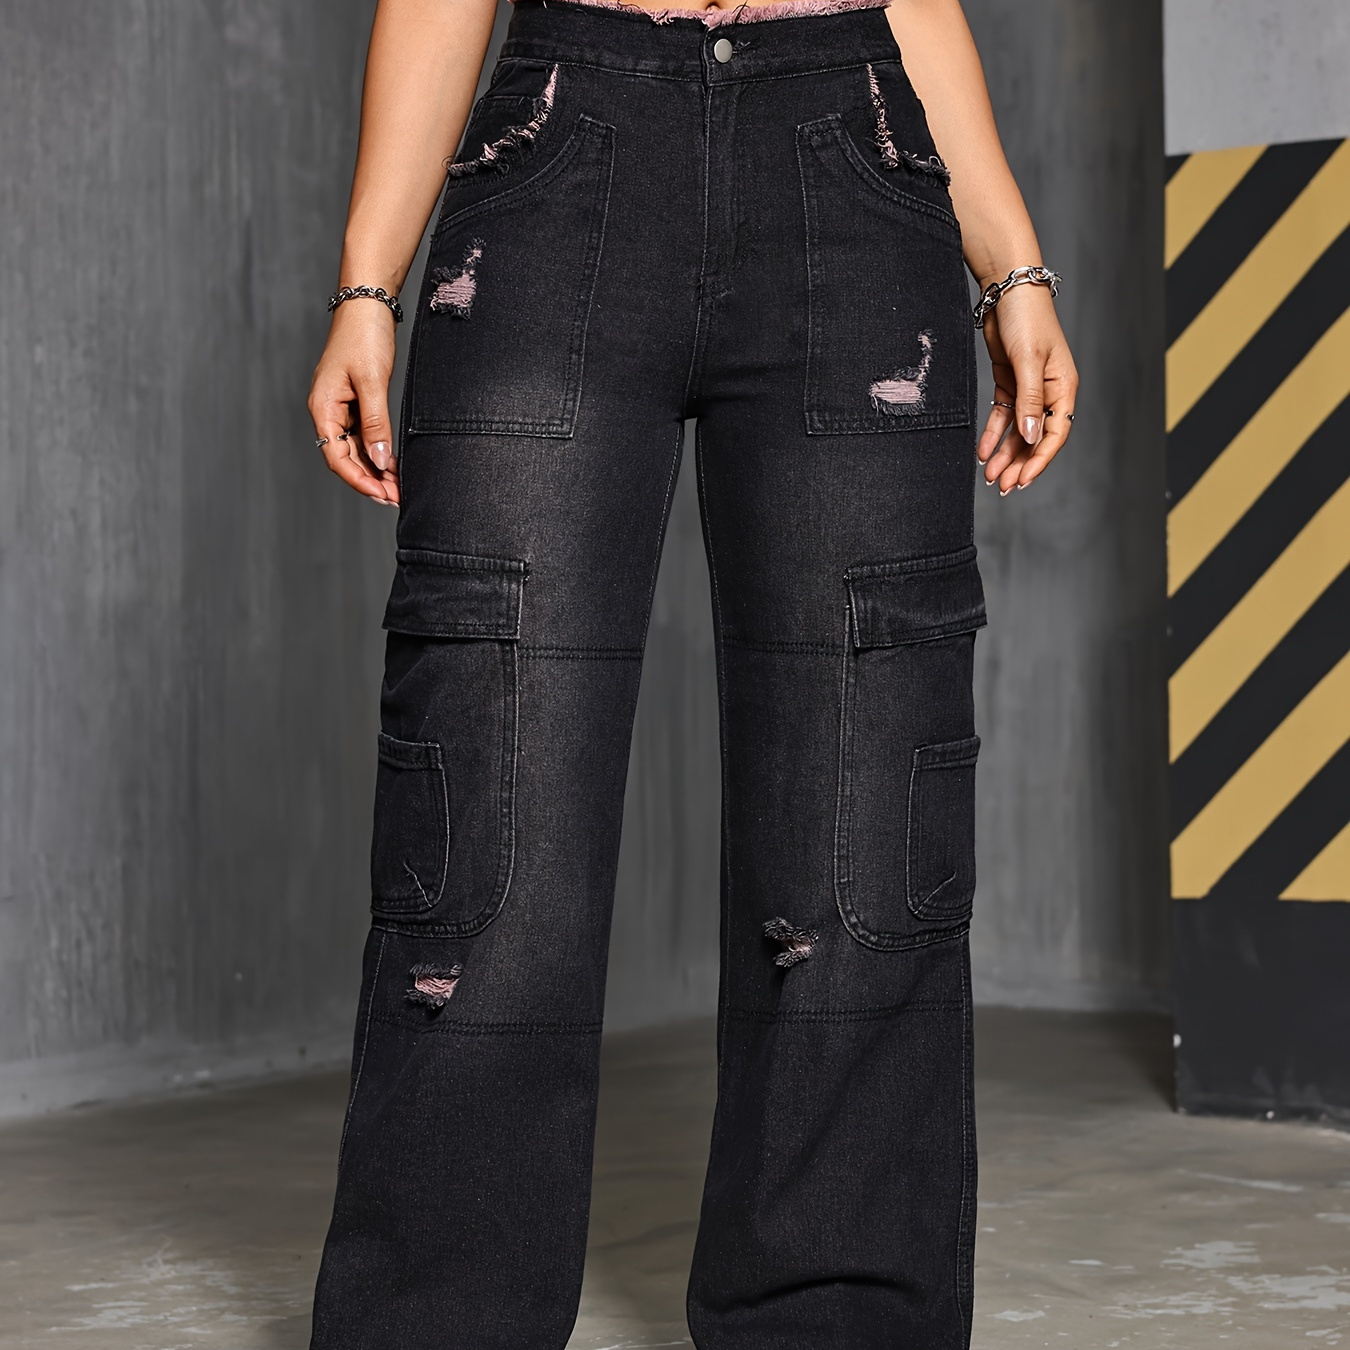 

Women's Vintage Ripped Distressed Cargo Denim Jeans, Retro High-waisted Straight Leg Pants With Pockets, Casual Workwear Style Suit For Autumn